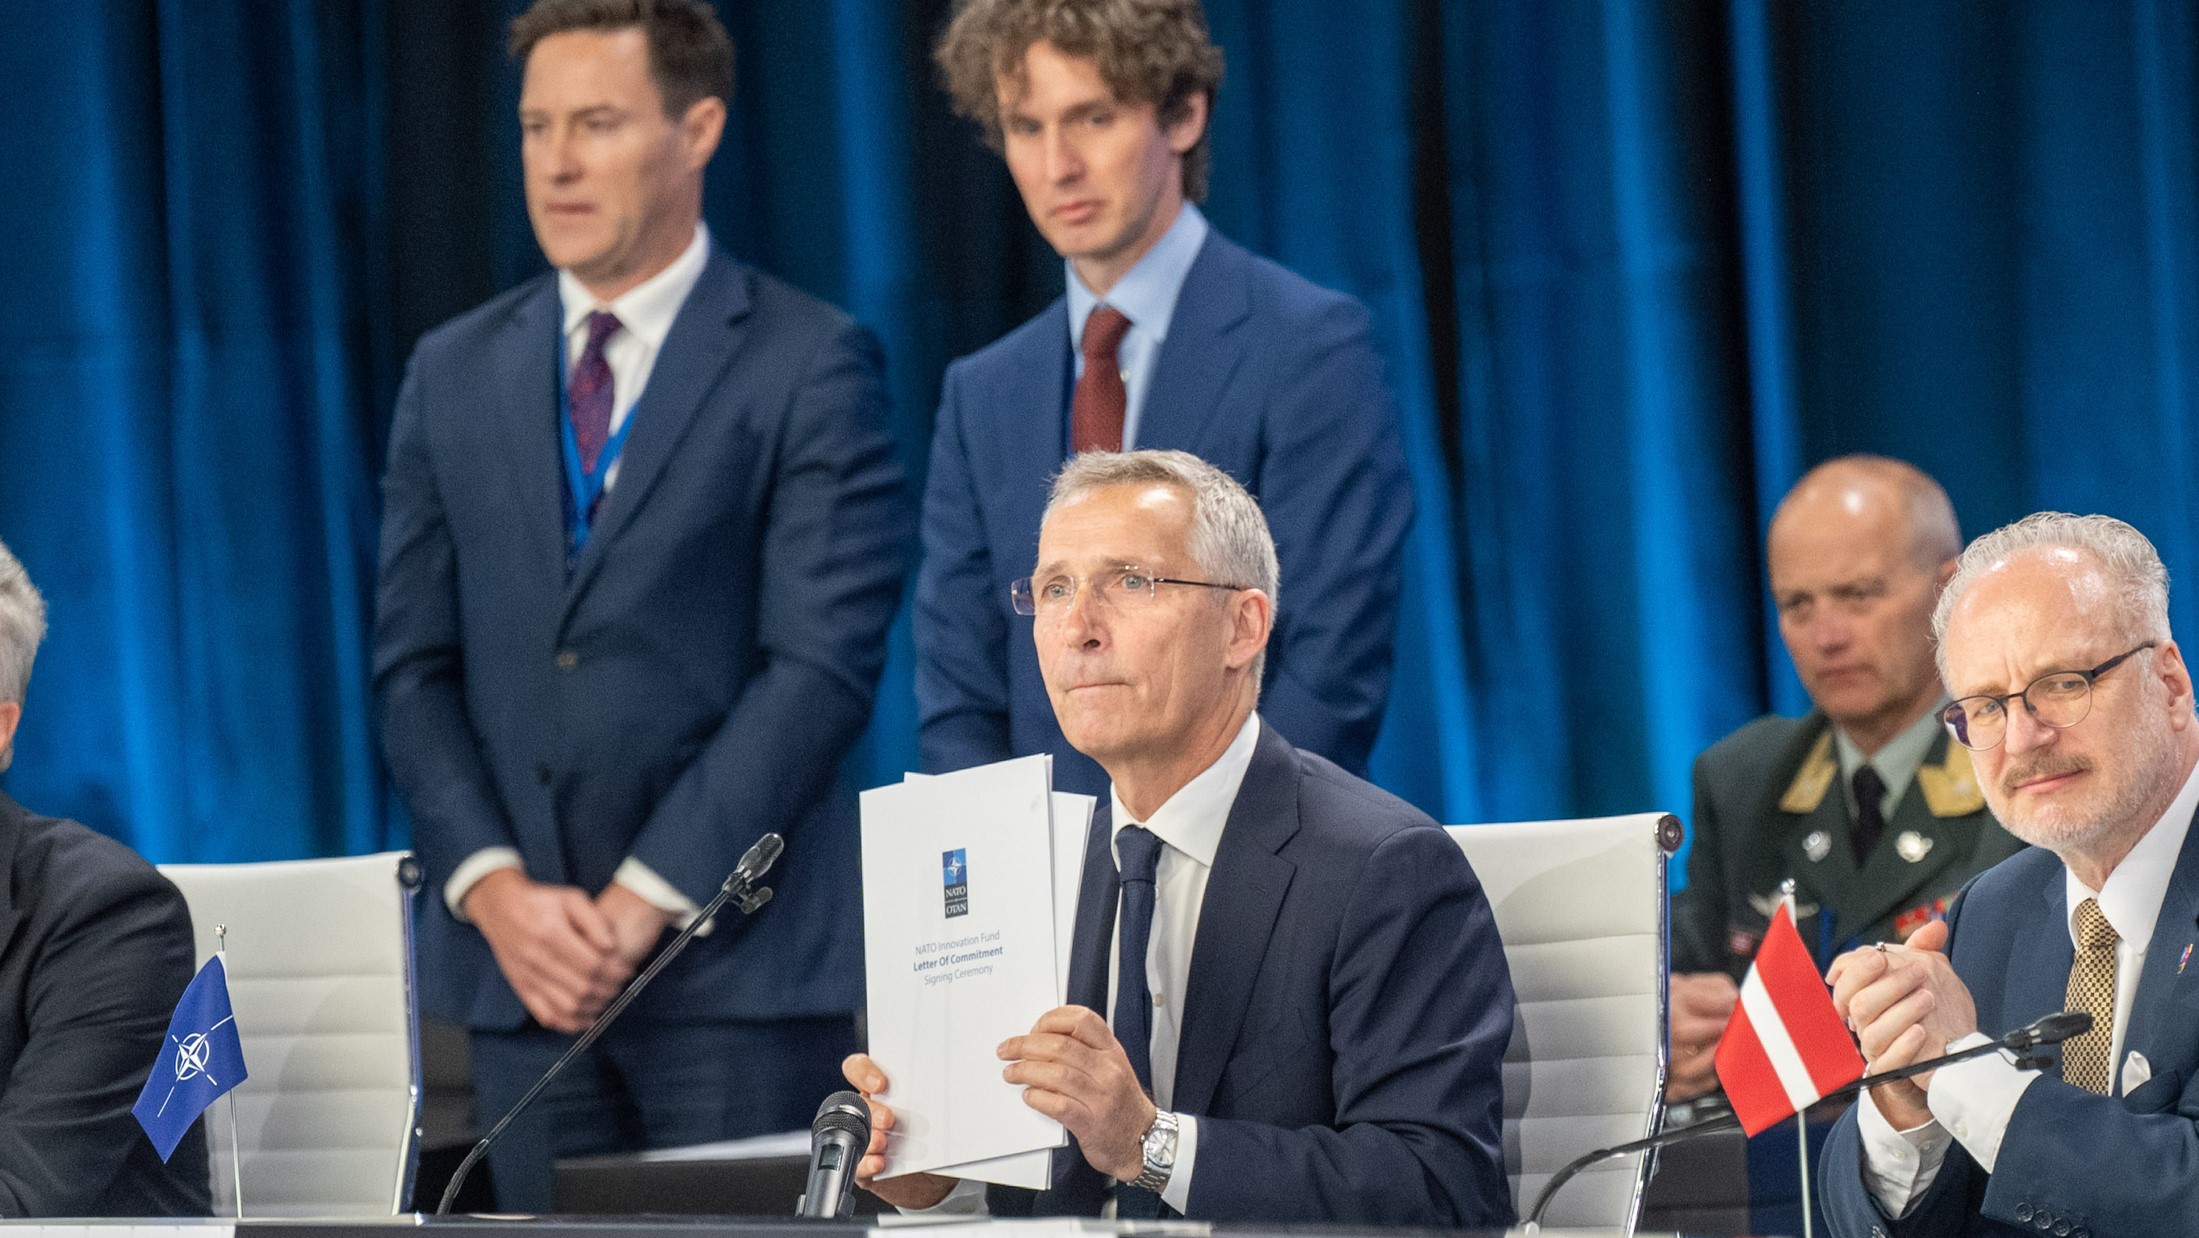 Signing Ceremony of the NATO Innovation Fund Letter of Commitment by participating Allied Leaders – NATO Summit Madrid – Spain, 27-30 June 2022